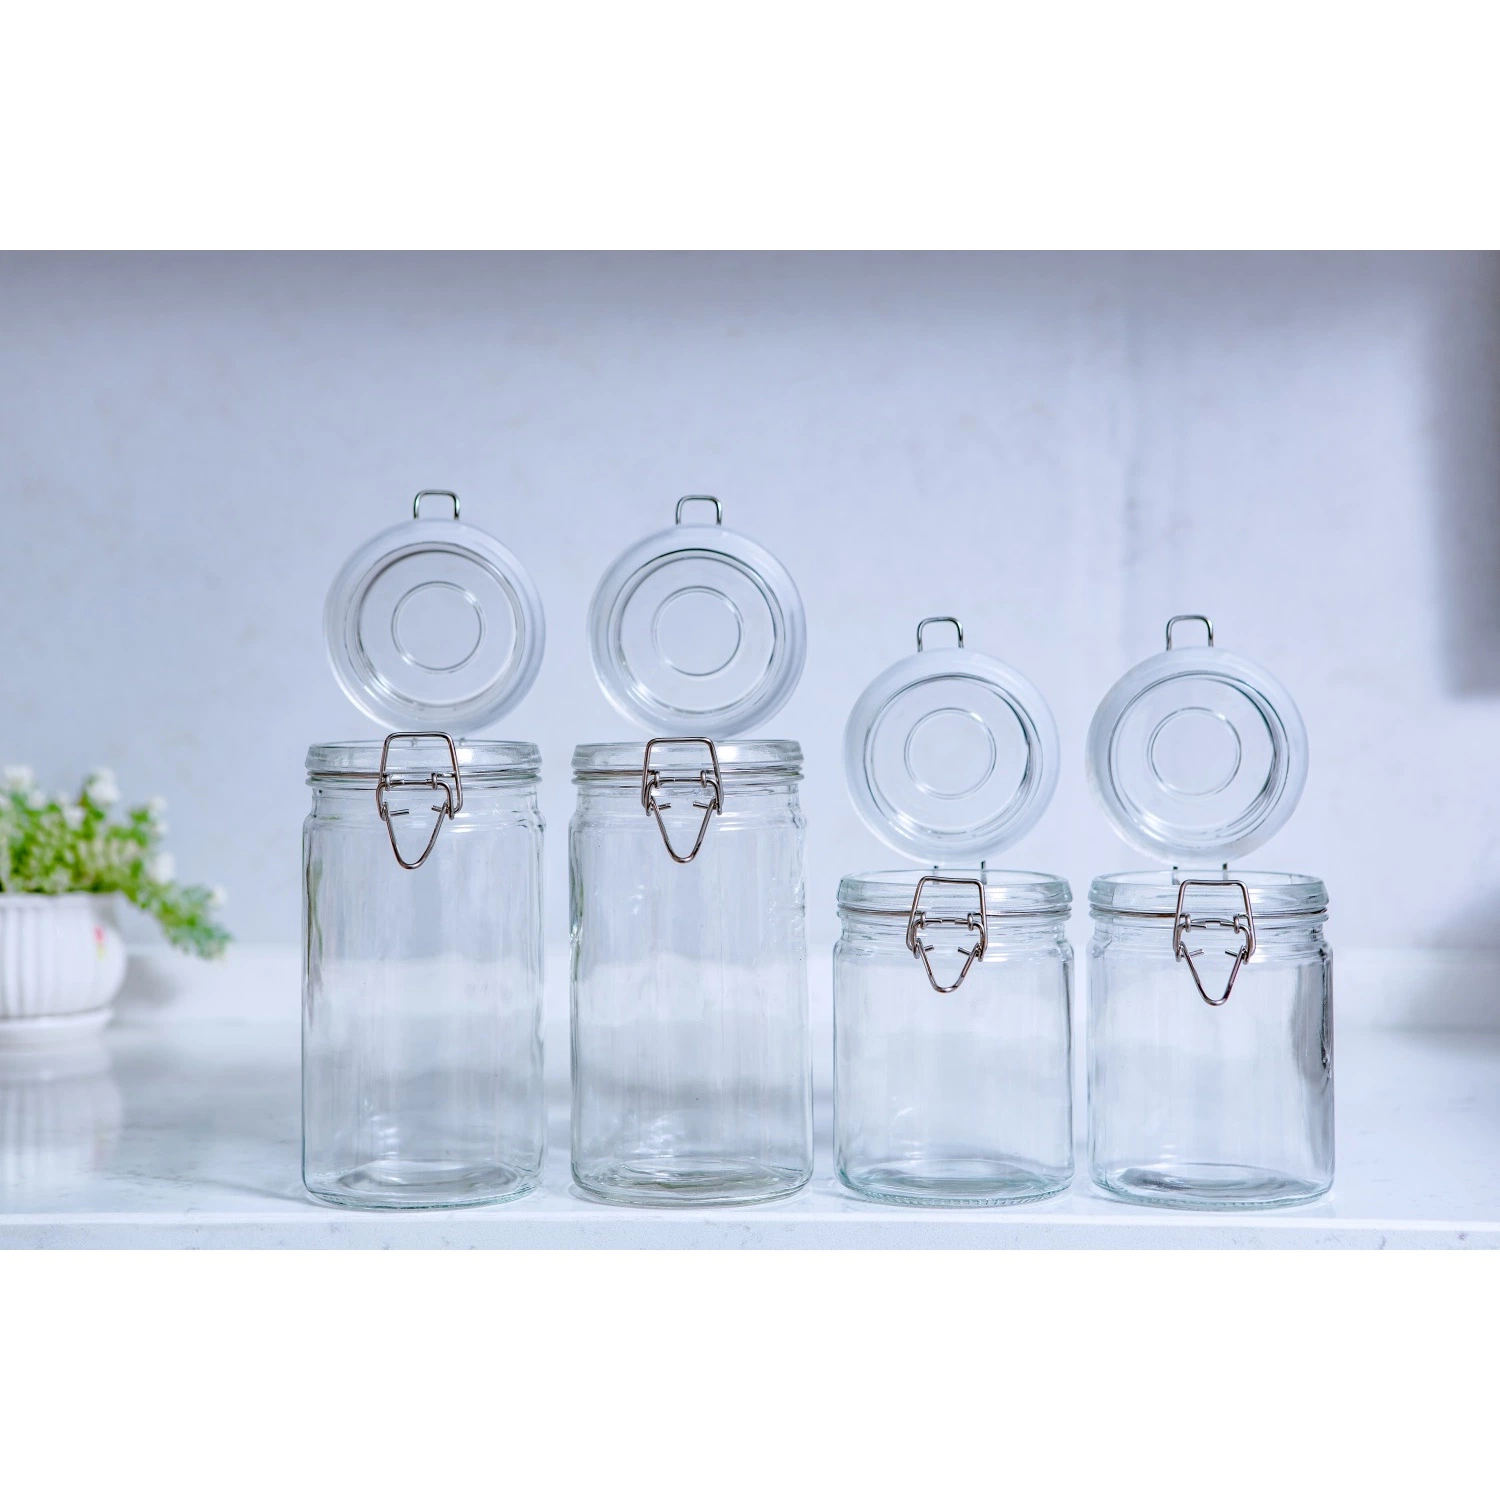 Wholesale Christmas Gift Clear Large Candy Biscuit Glass Storage Jar Set with Decorative Ceramic Lid